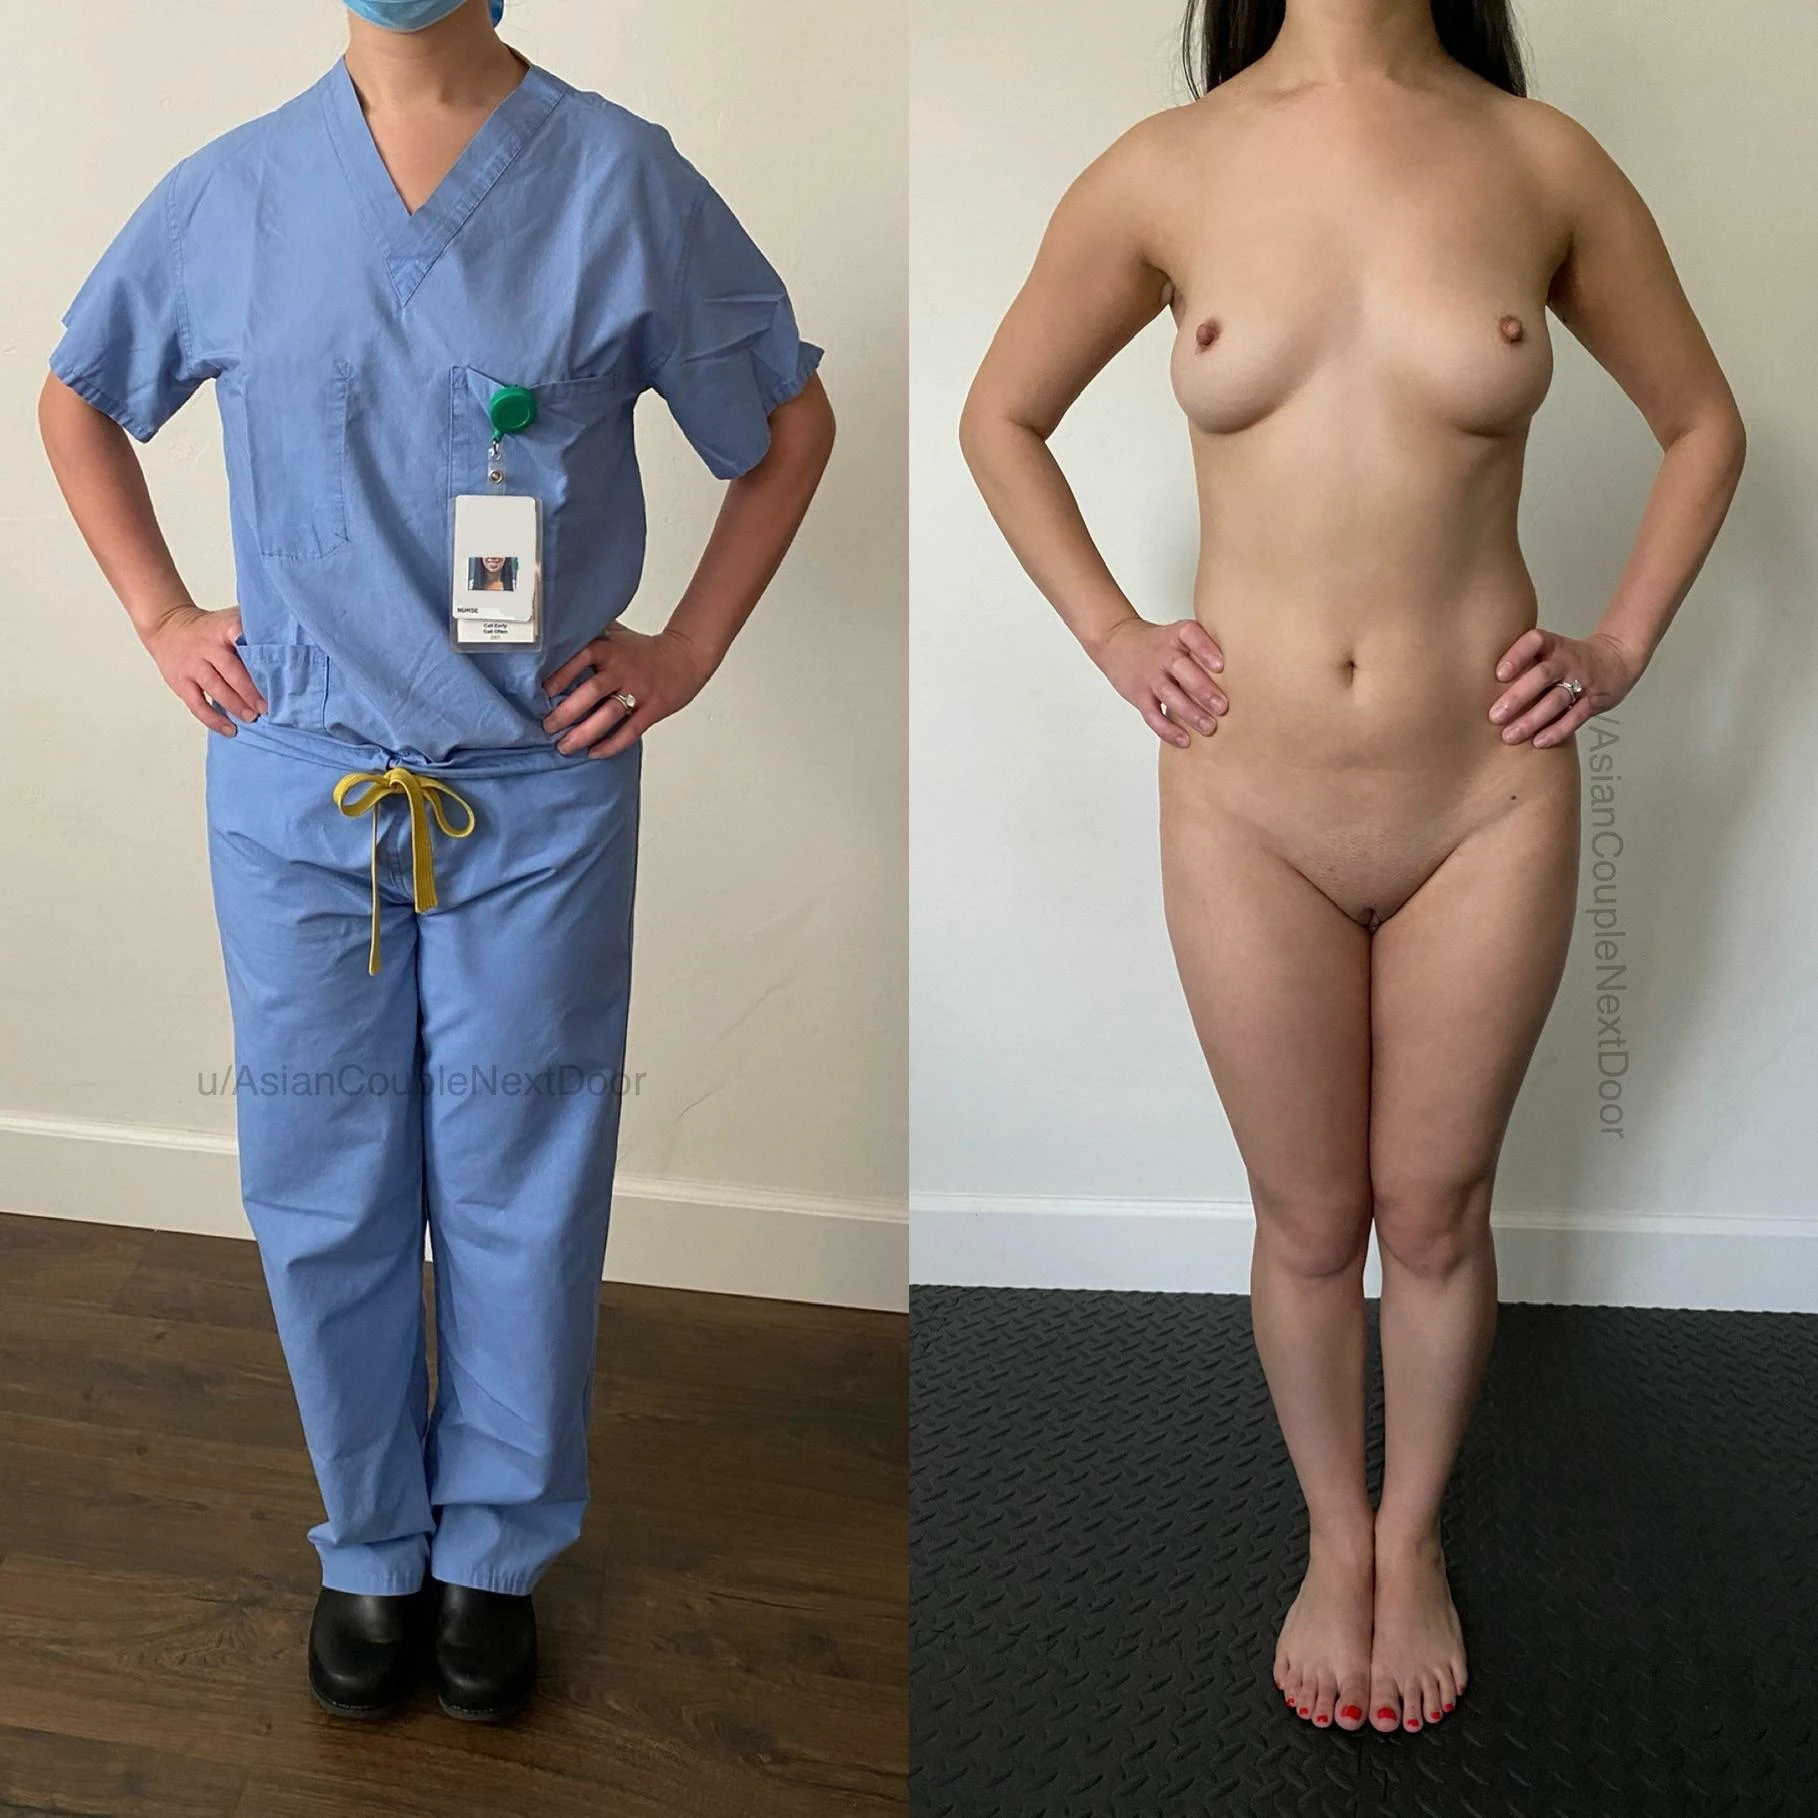 Have you ever fantasized about your Filipina nurse naked? Now you don’t have to ?! [F33]